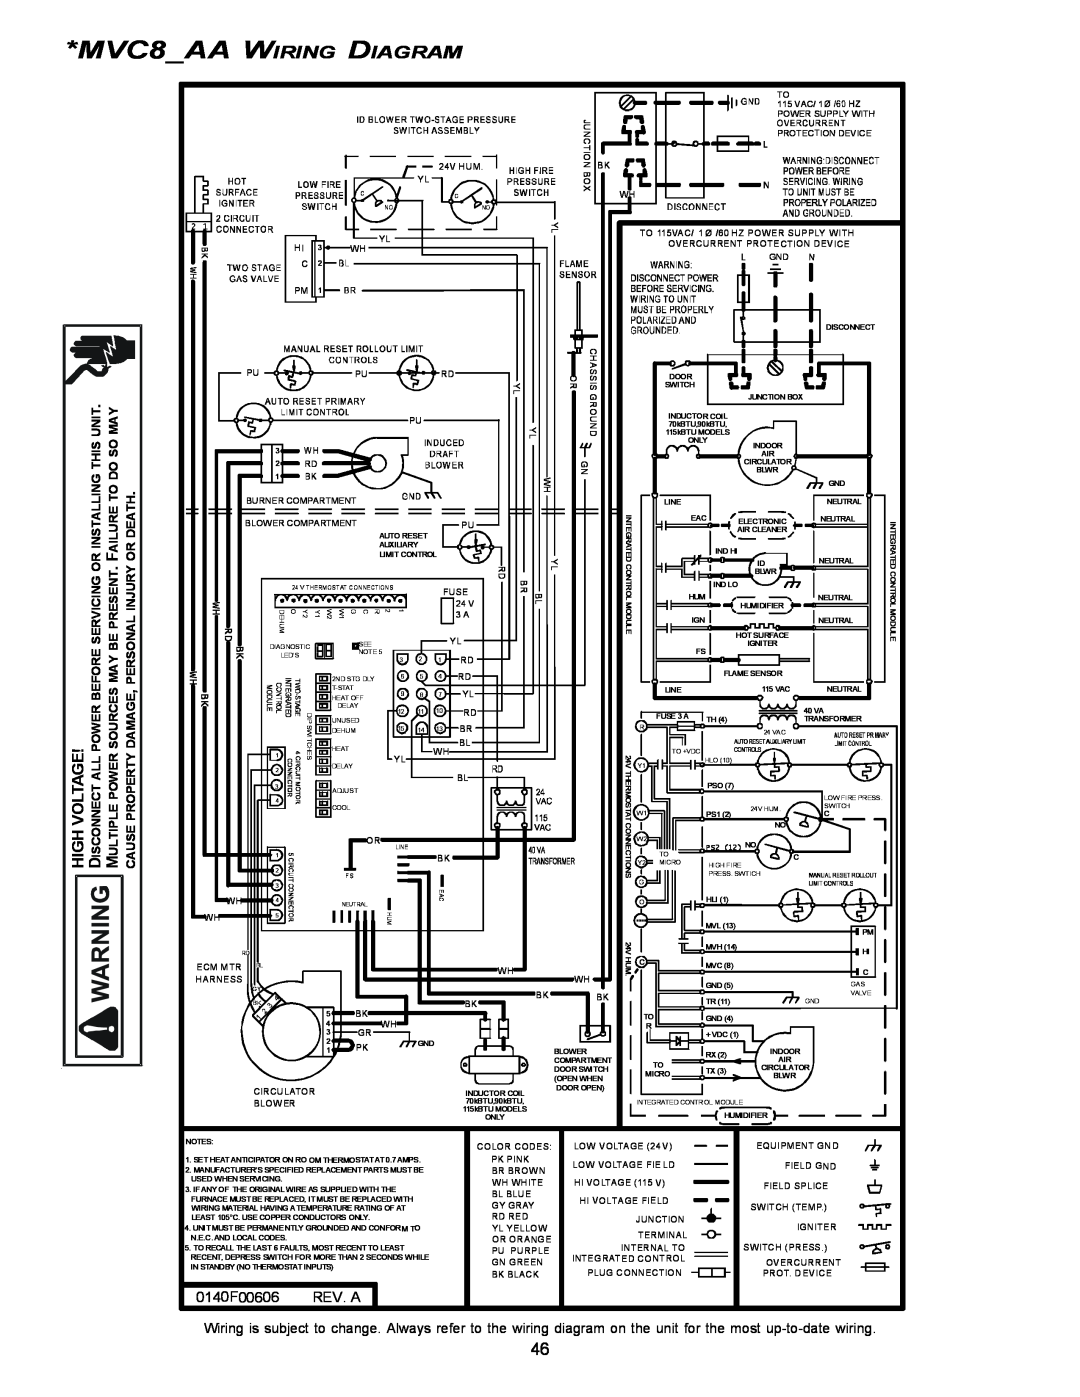 Goodman Mfg MVC8 AA WIRING DIAGRAM, Unit, Servicing Or Installing This, Maybe Present. Failure To Do So, Bk Wh, Rd Wh 